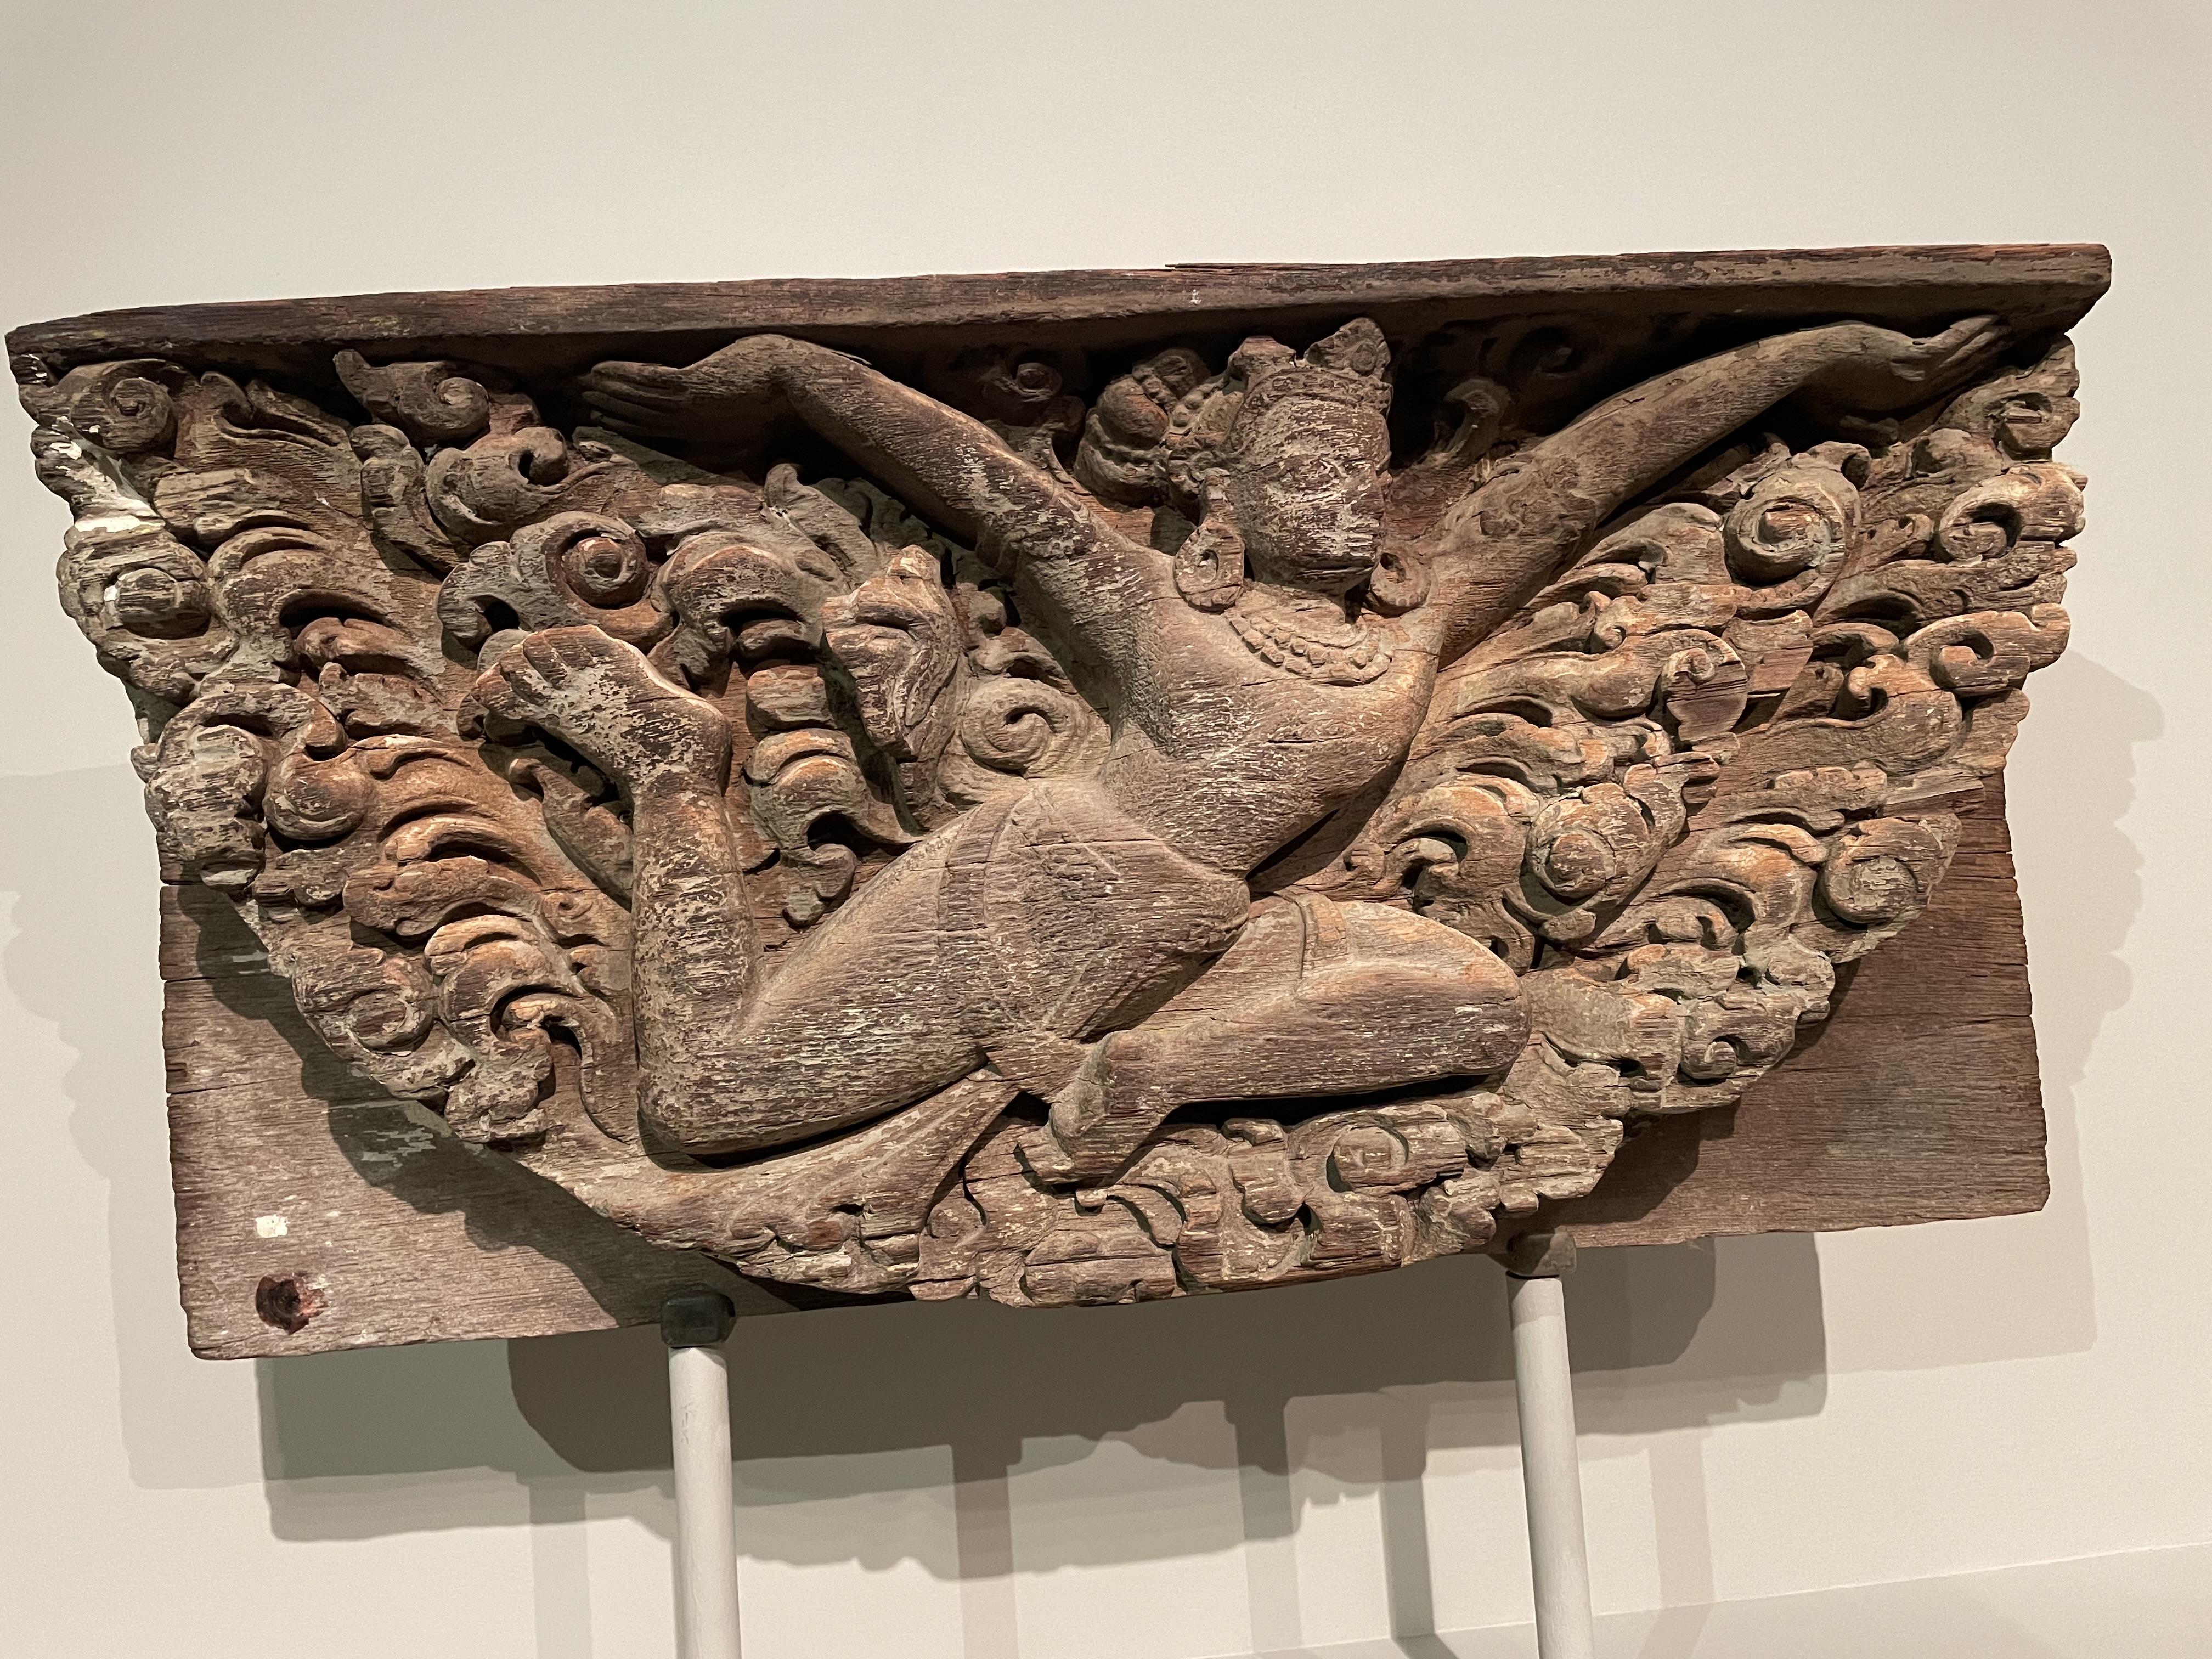 The Rubin Museum of Art, New York to return two wooden artworks to Nepal